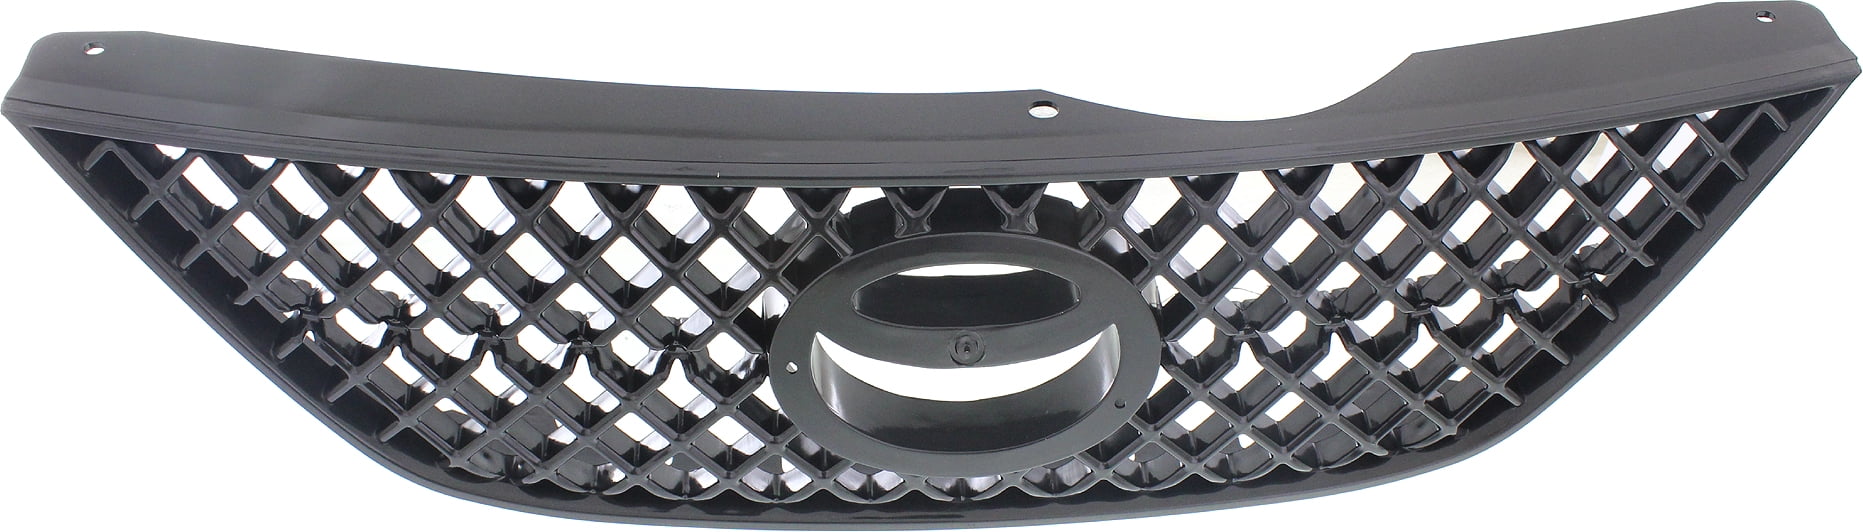 New Grille For 2002-2003 Toyota Solara Chrome Shell with Gray Insert Plastic